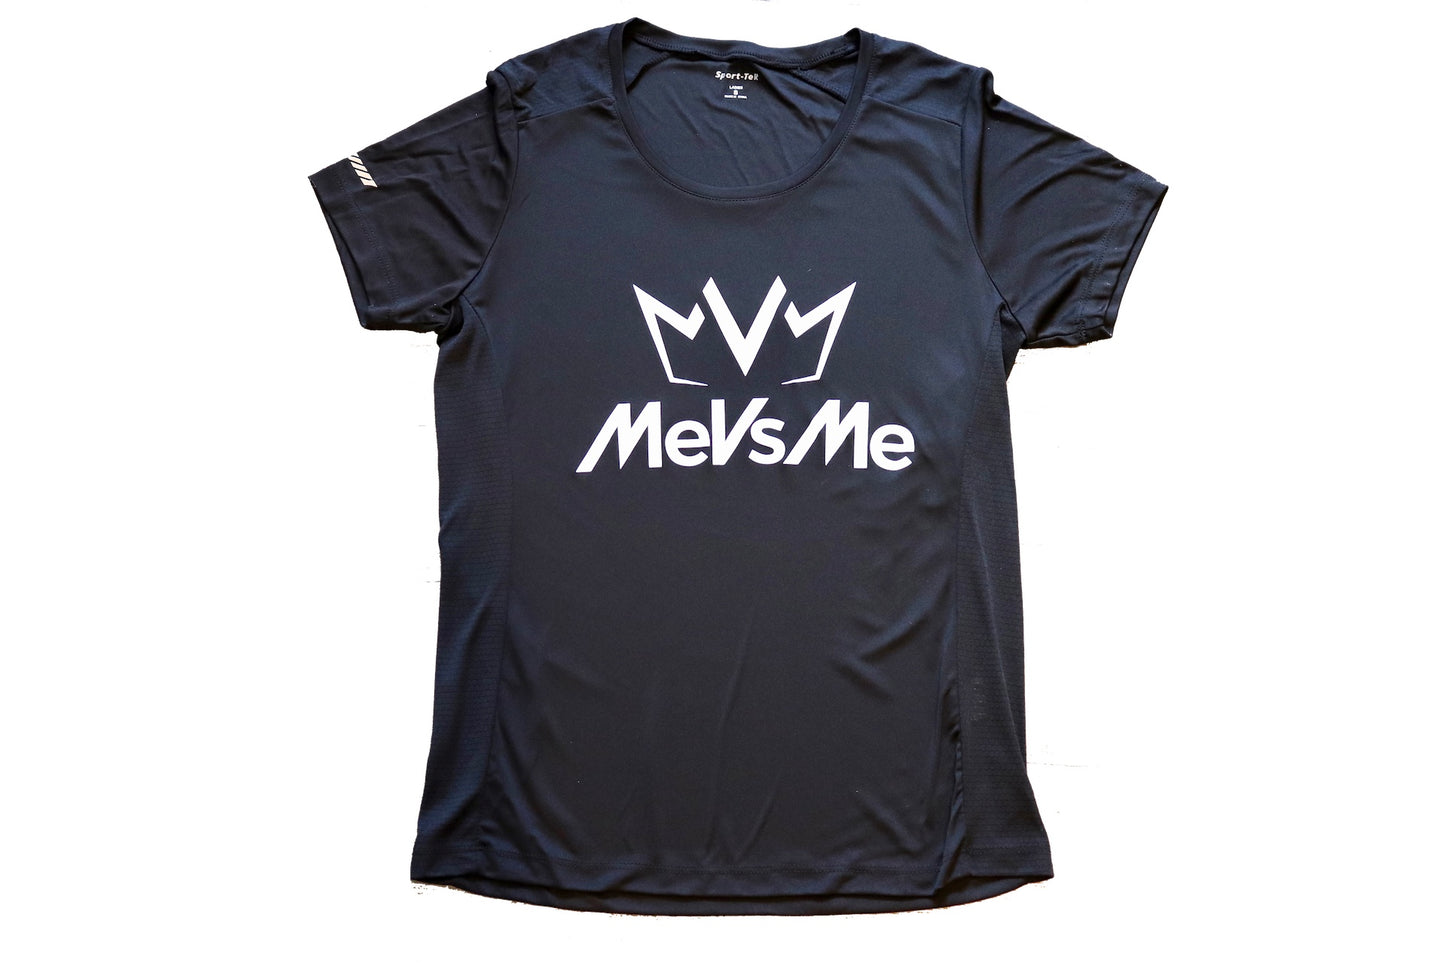 Frontside view of the black Women's MVM Performance Tee with MeVsMe logos.